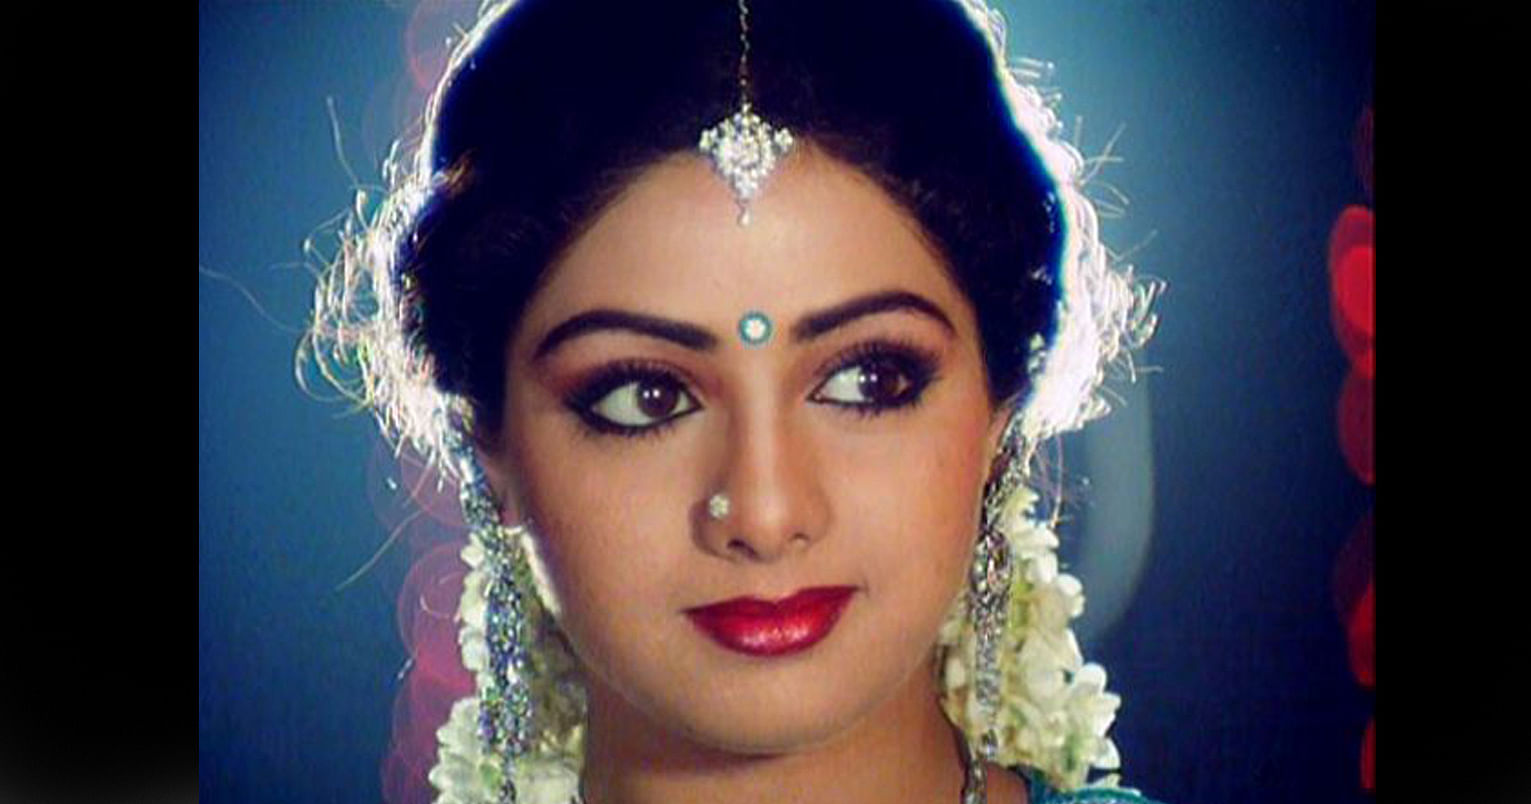 Shridevi Ki Sexi Xvideos - Why Sridevi Was an Icon to the Indian Queer Community